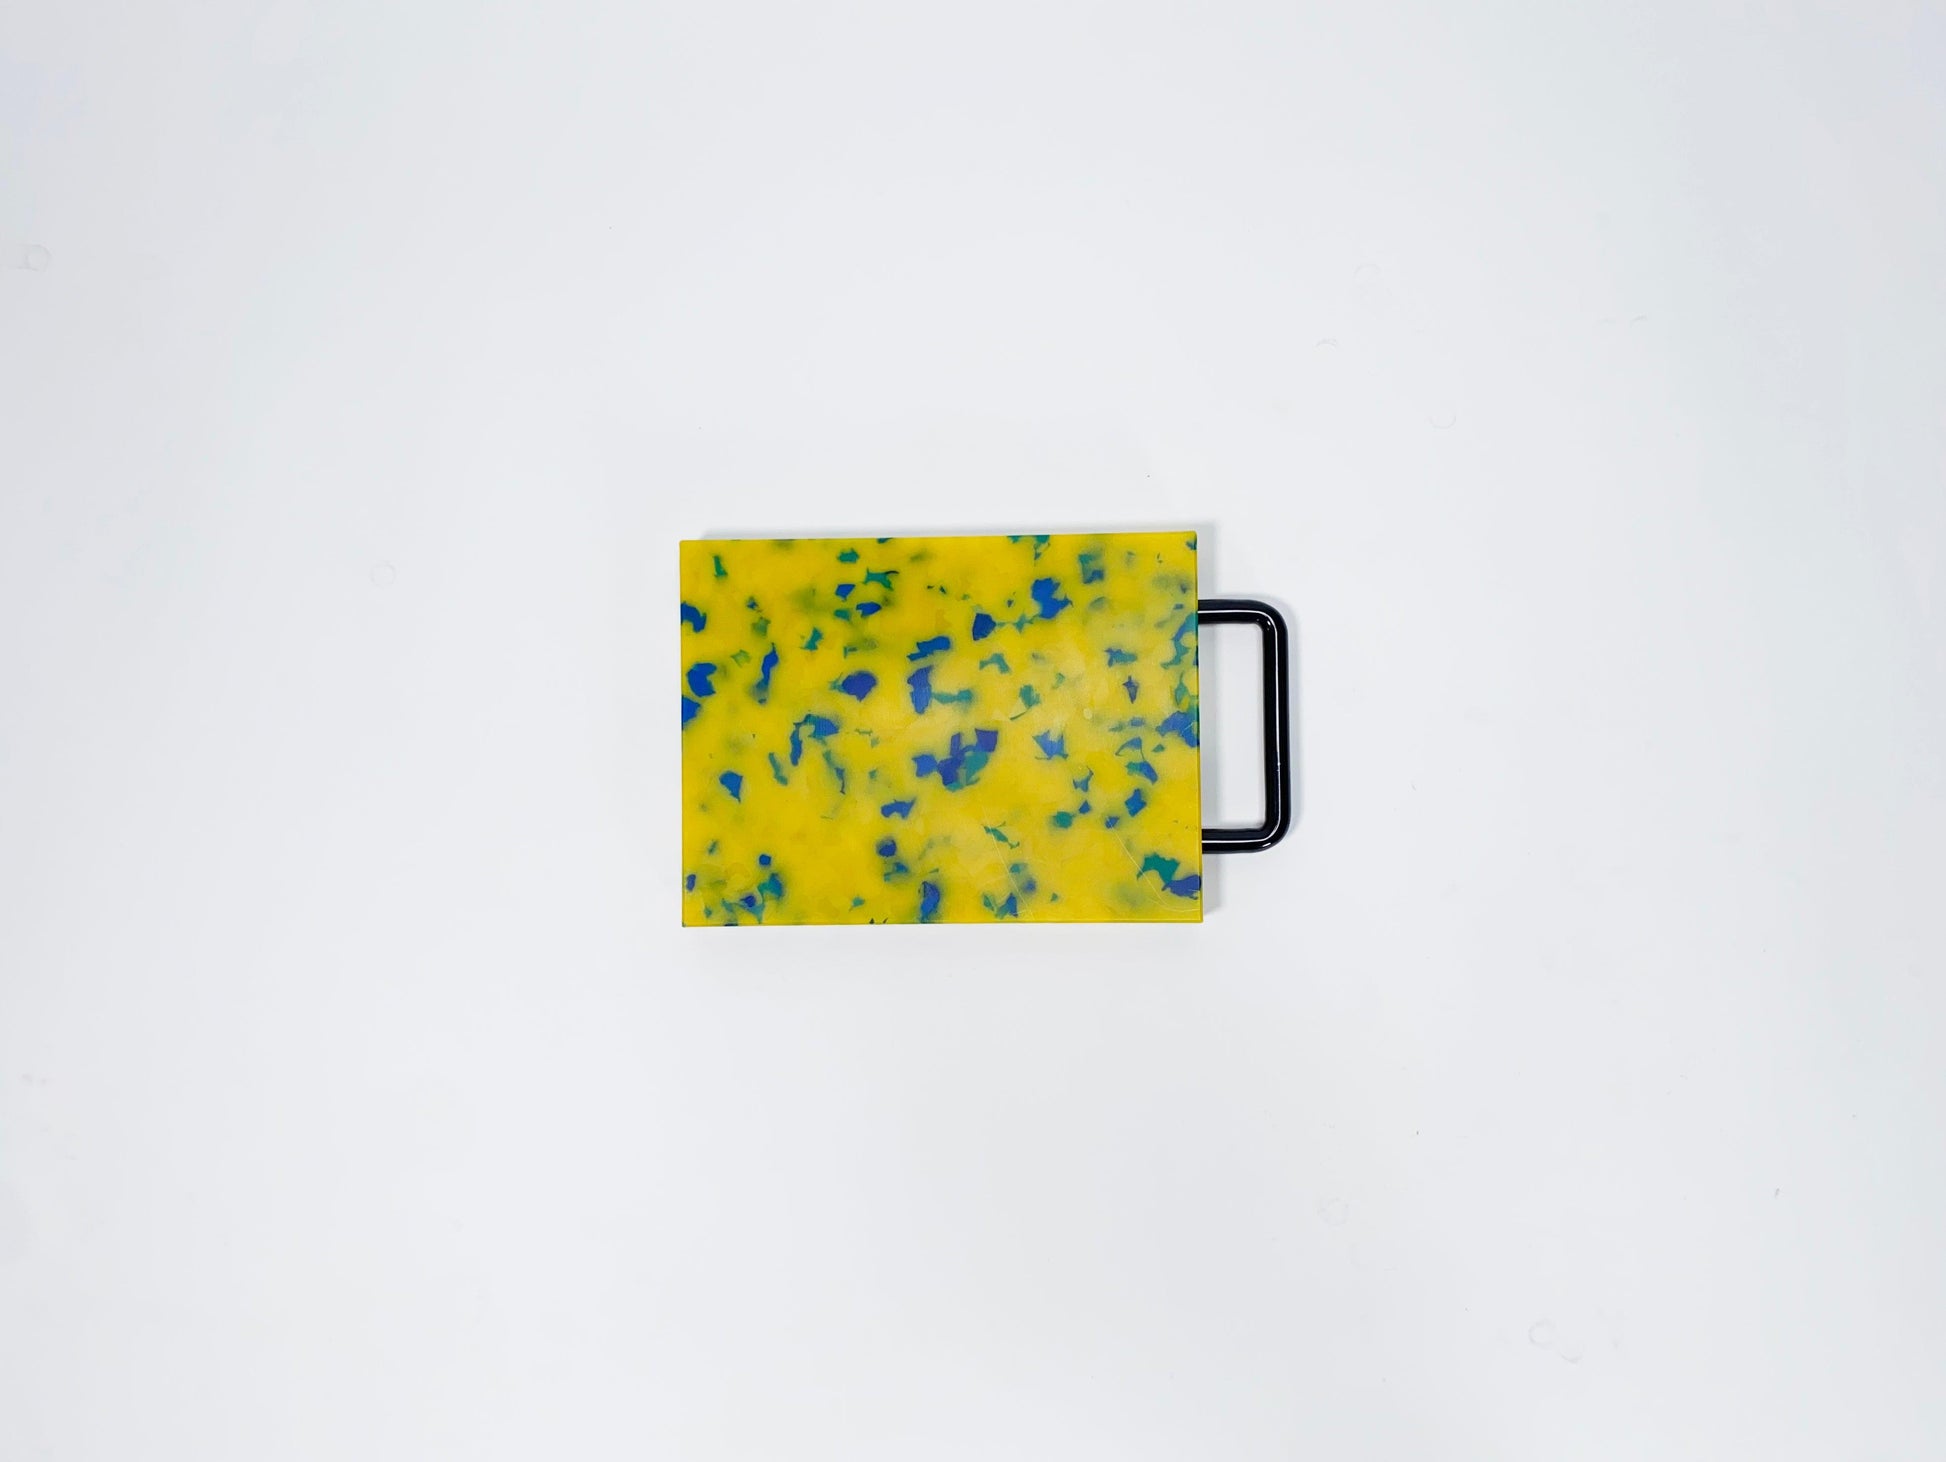 Small yellow cutting board with blue confetti and black handle 